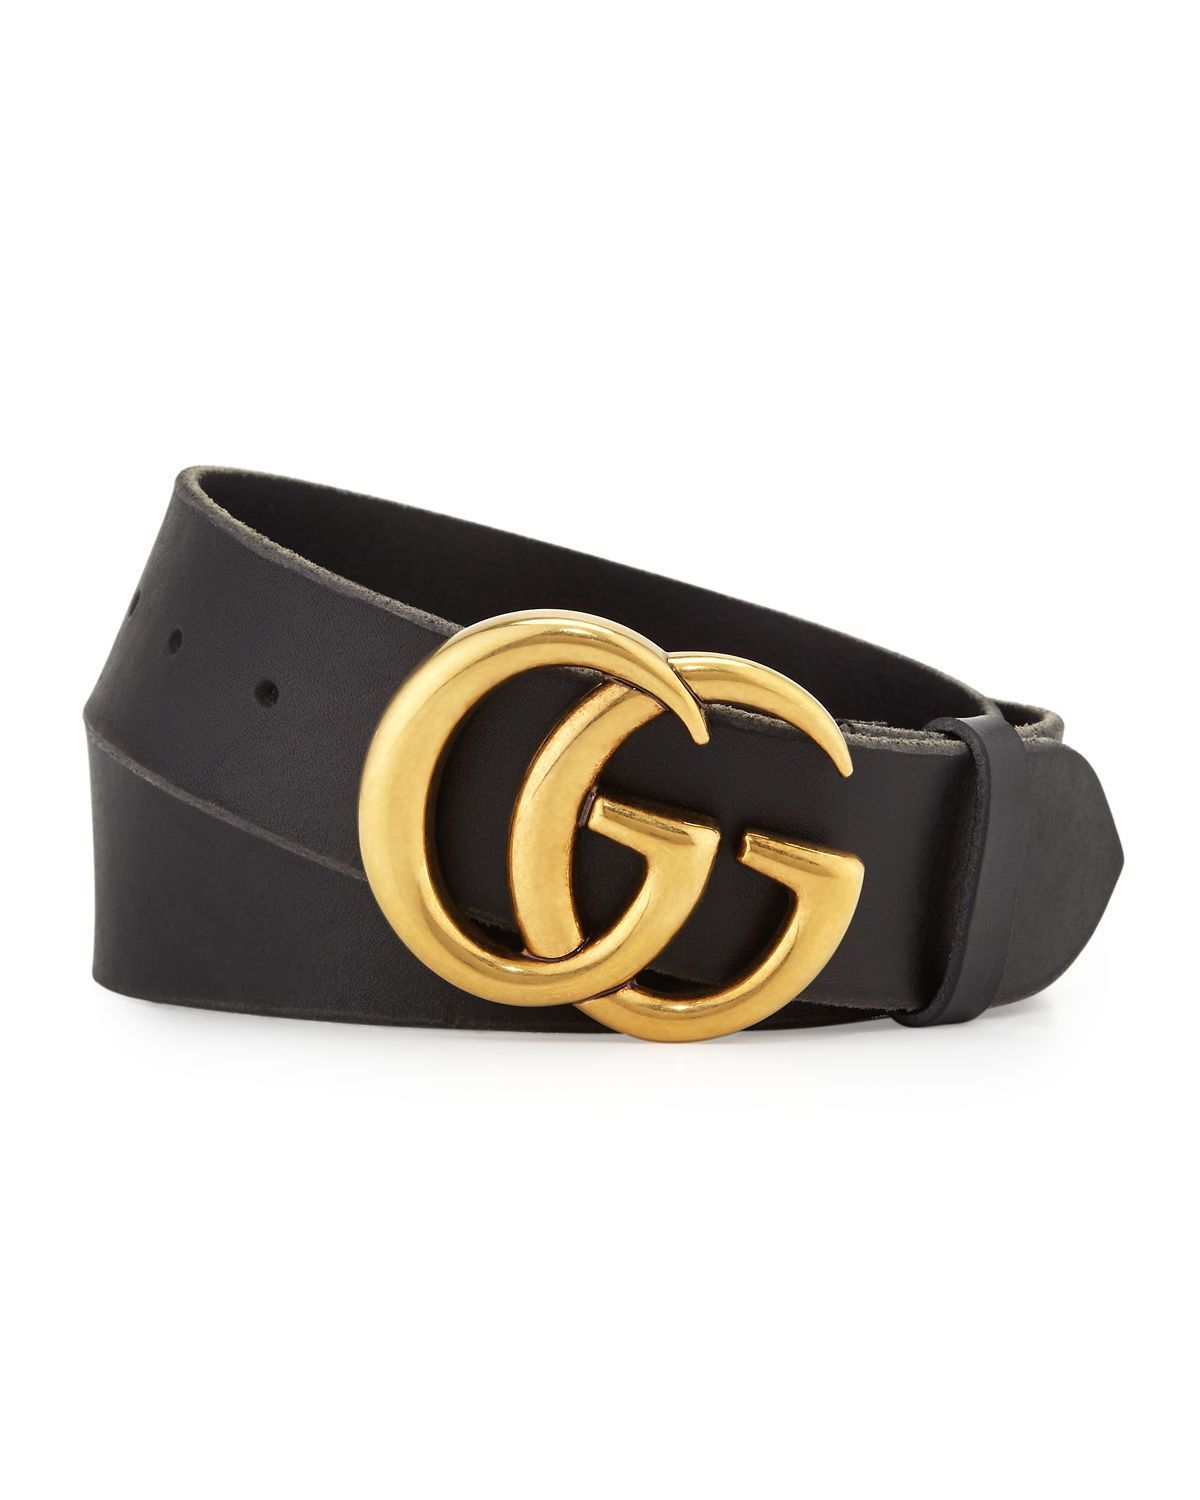 the cheugy considered gucci belts